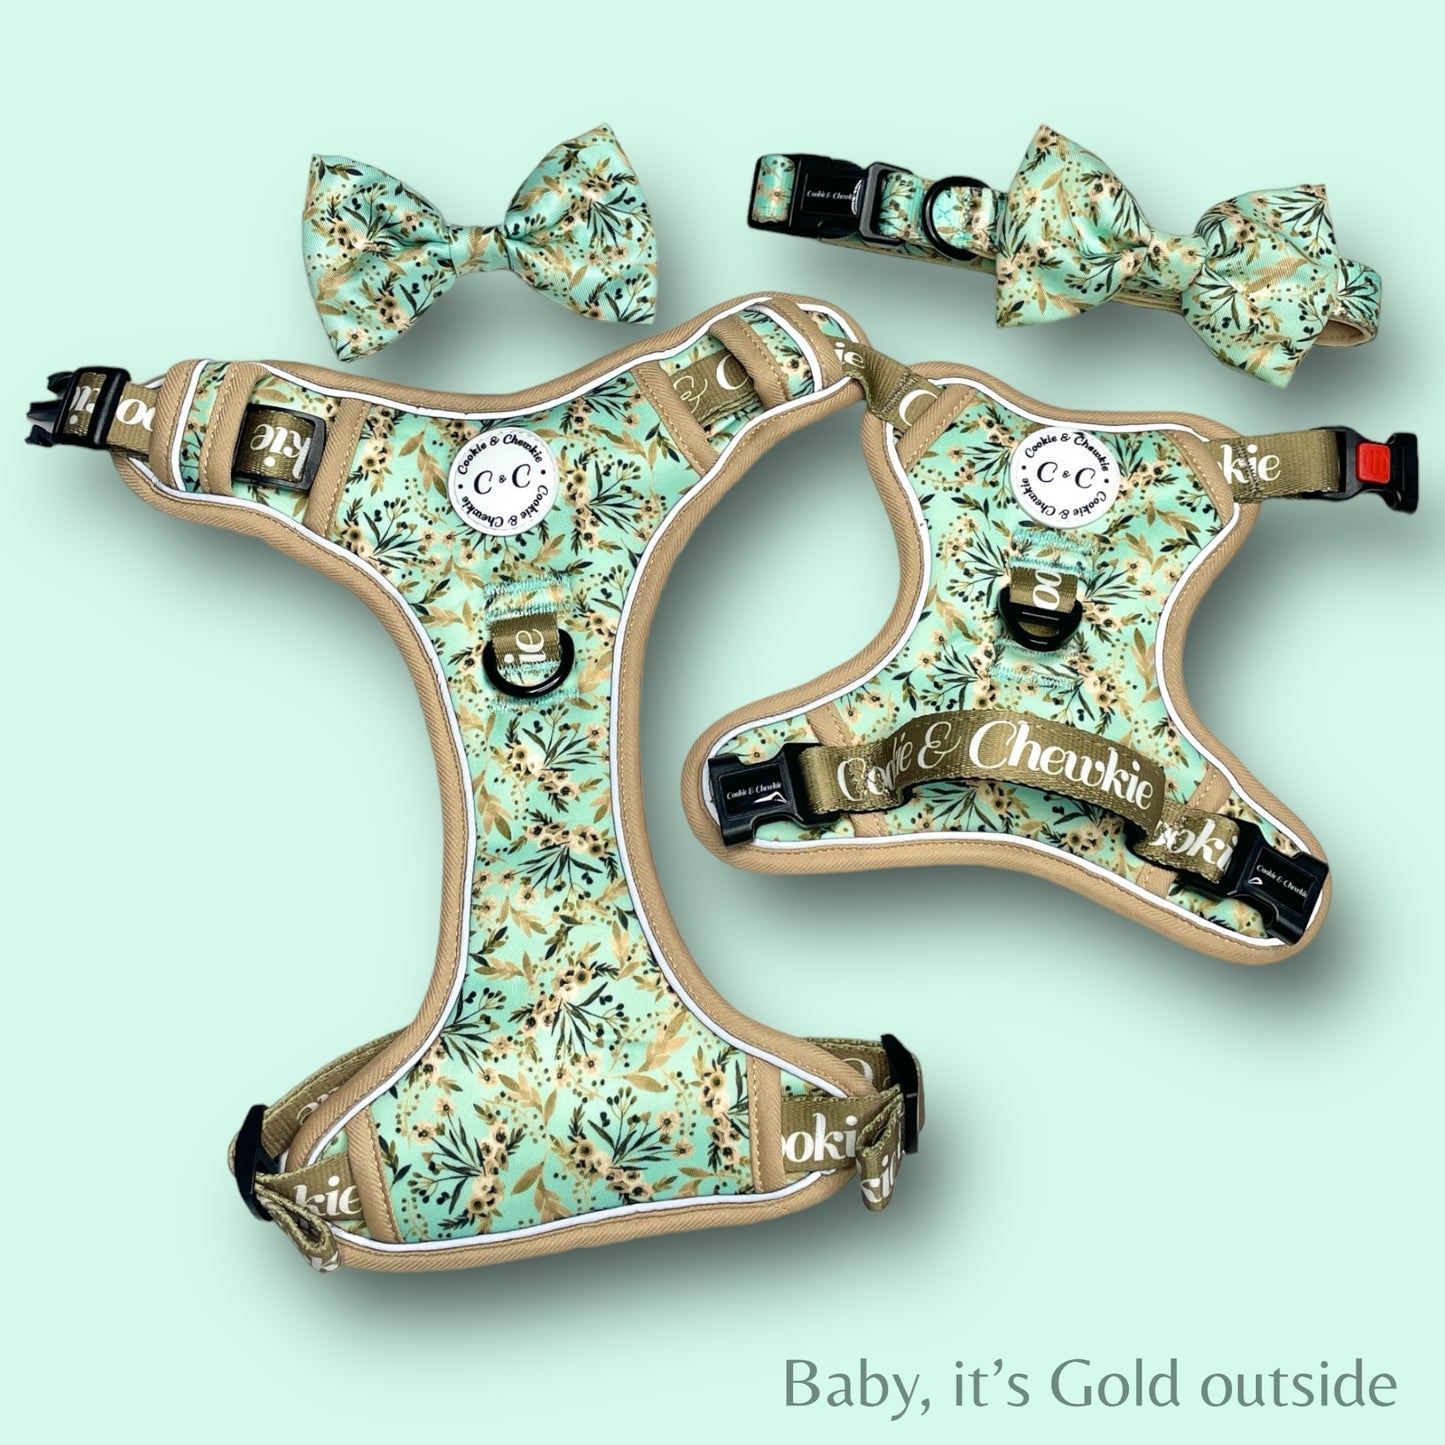 Adjustable TUFF Harness - 'Baby, it's Gold outside'